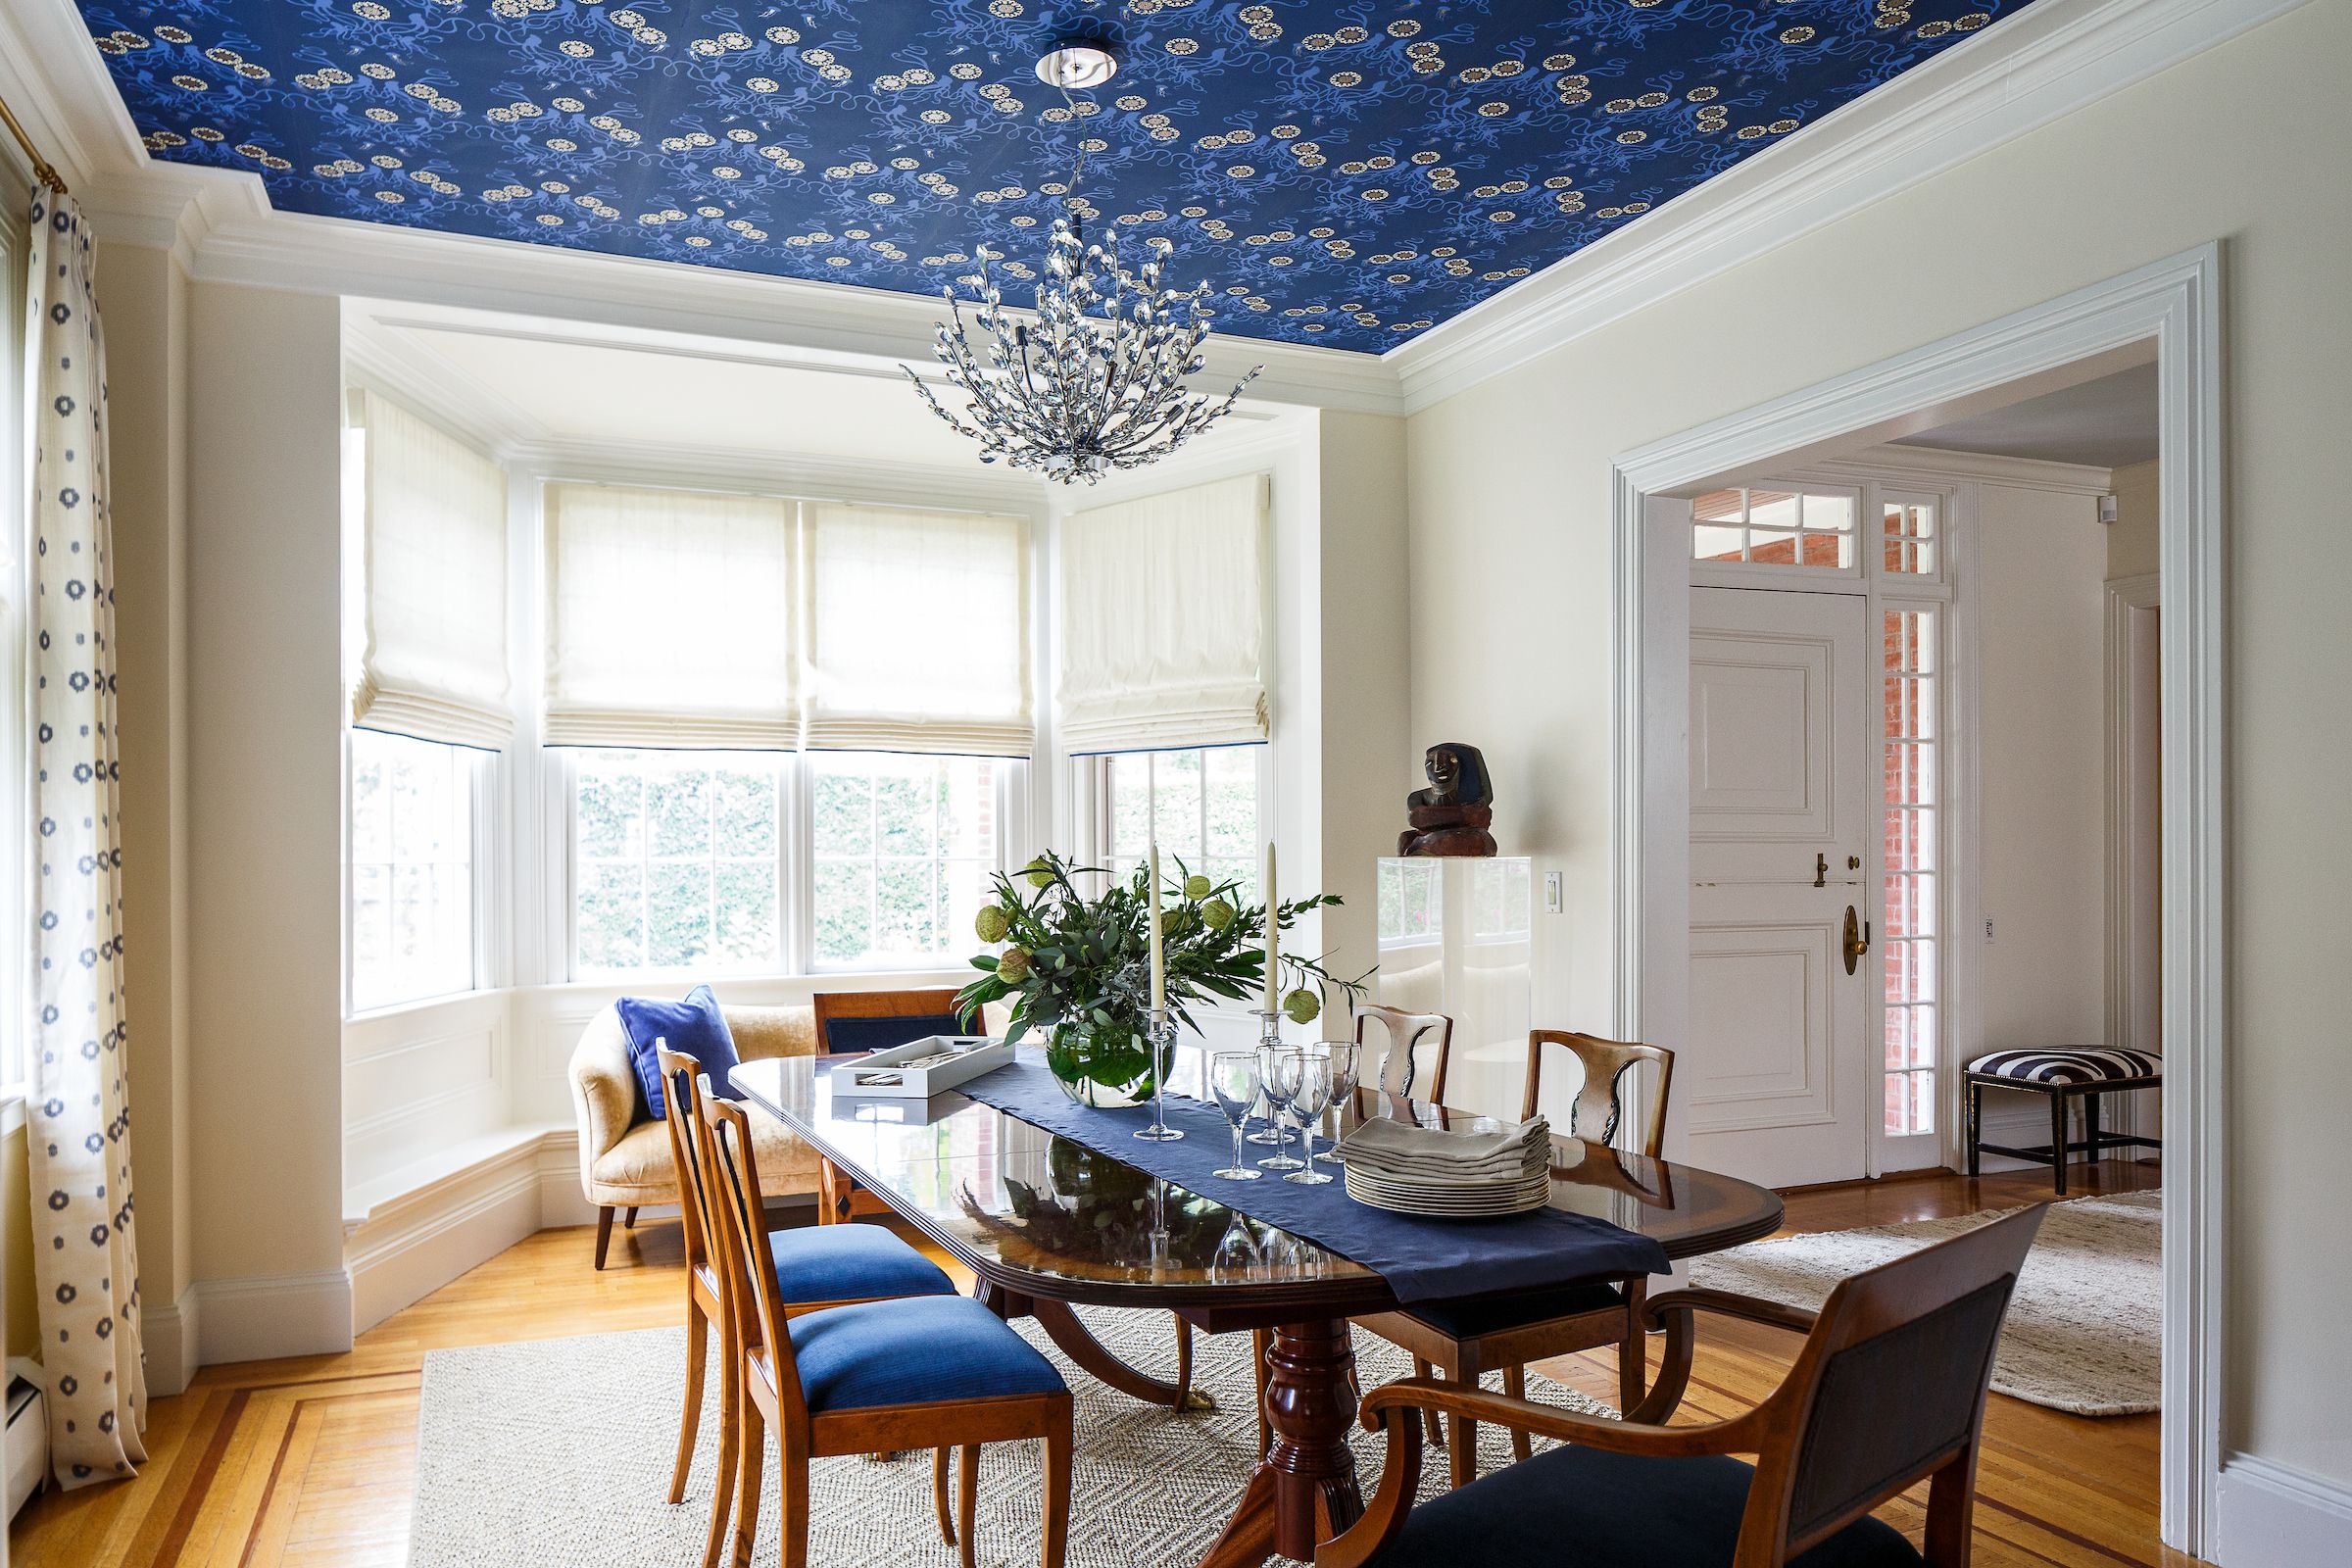 Use Wallpaper for Your Dining Room Ceiling